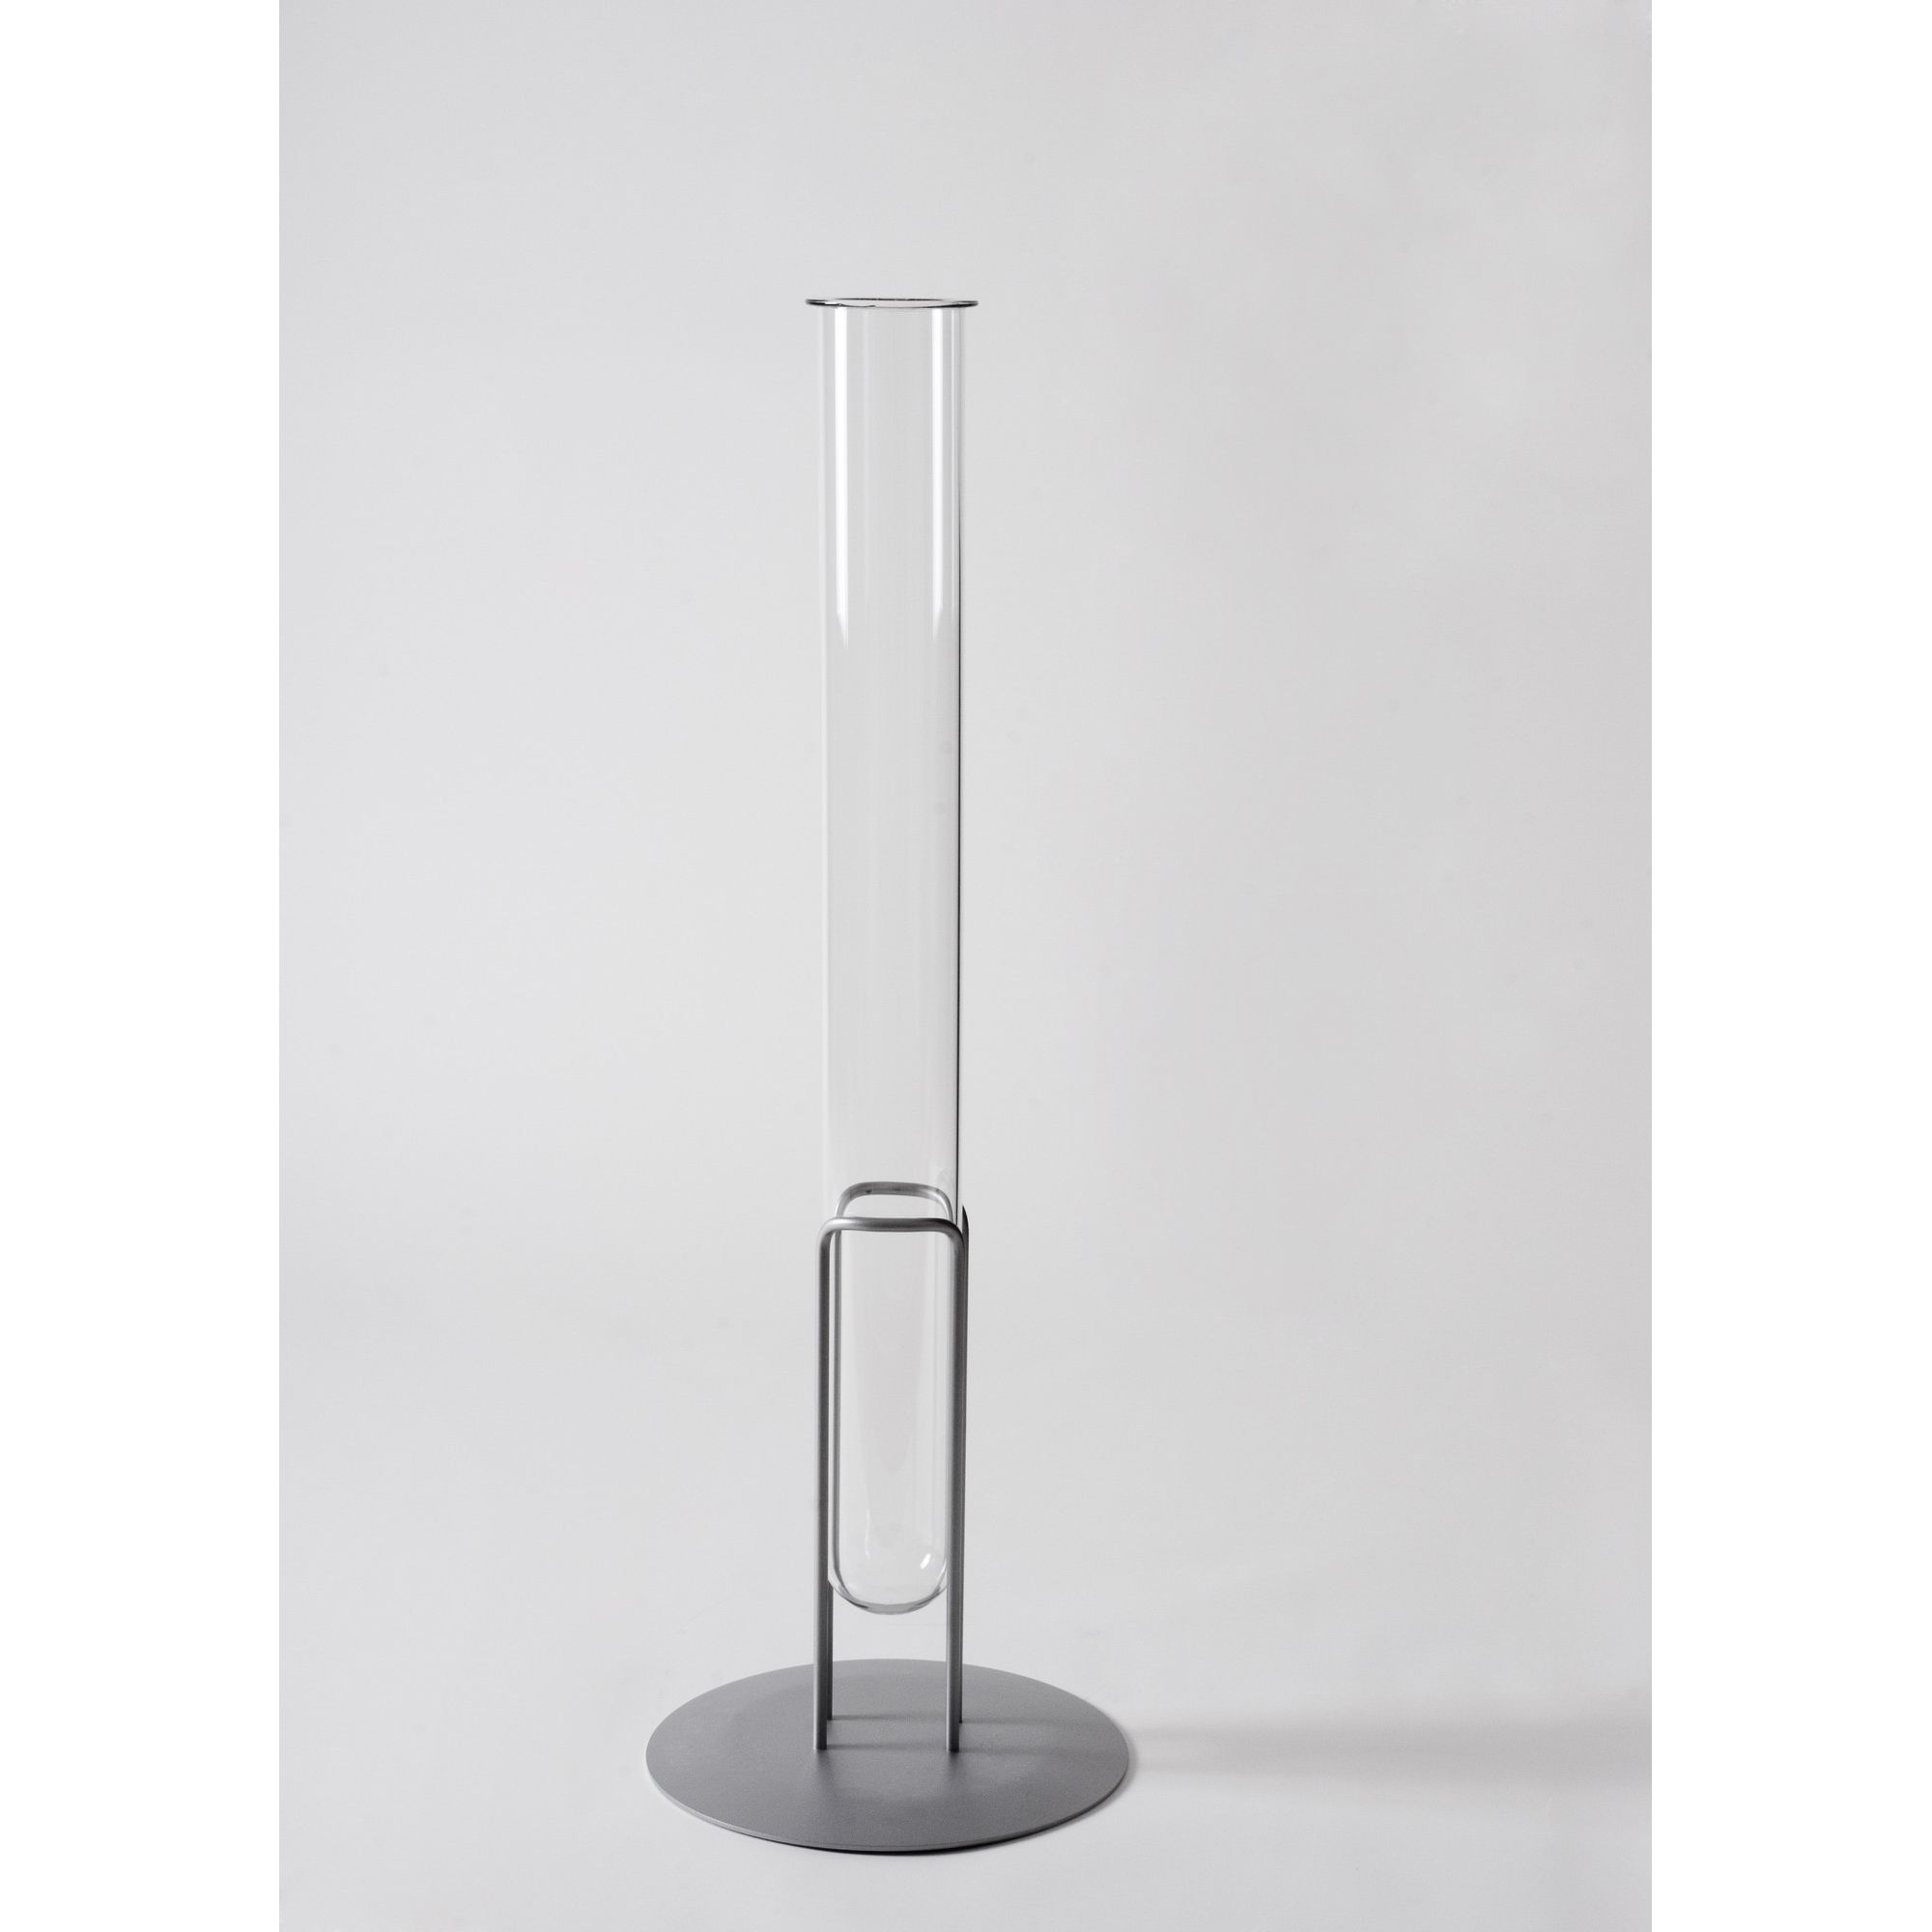 Progetti Lerici Standing Flower Vase - Silver at Tesco Direct